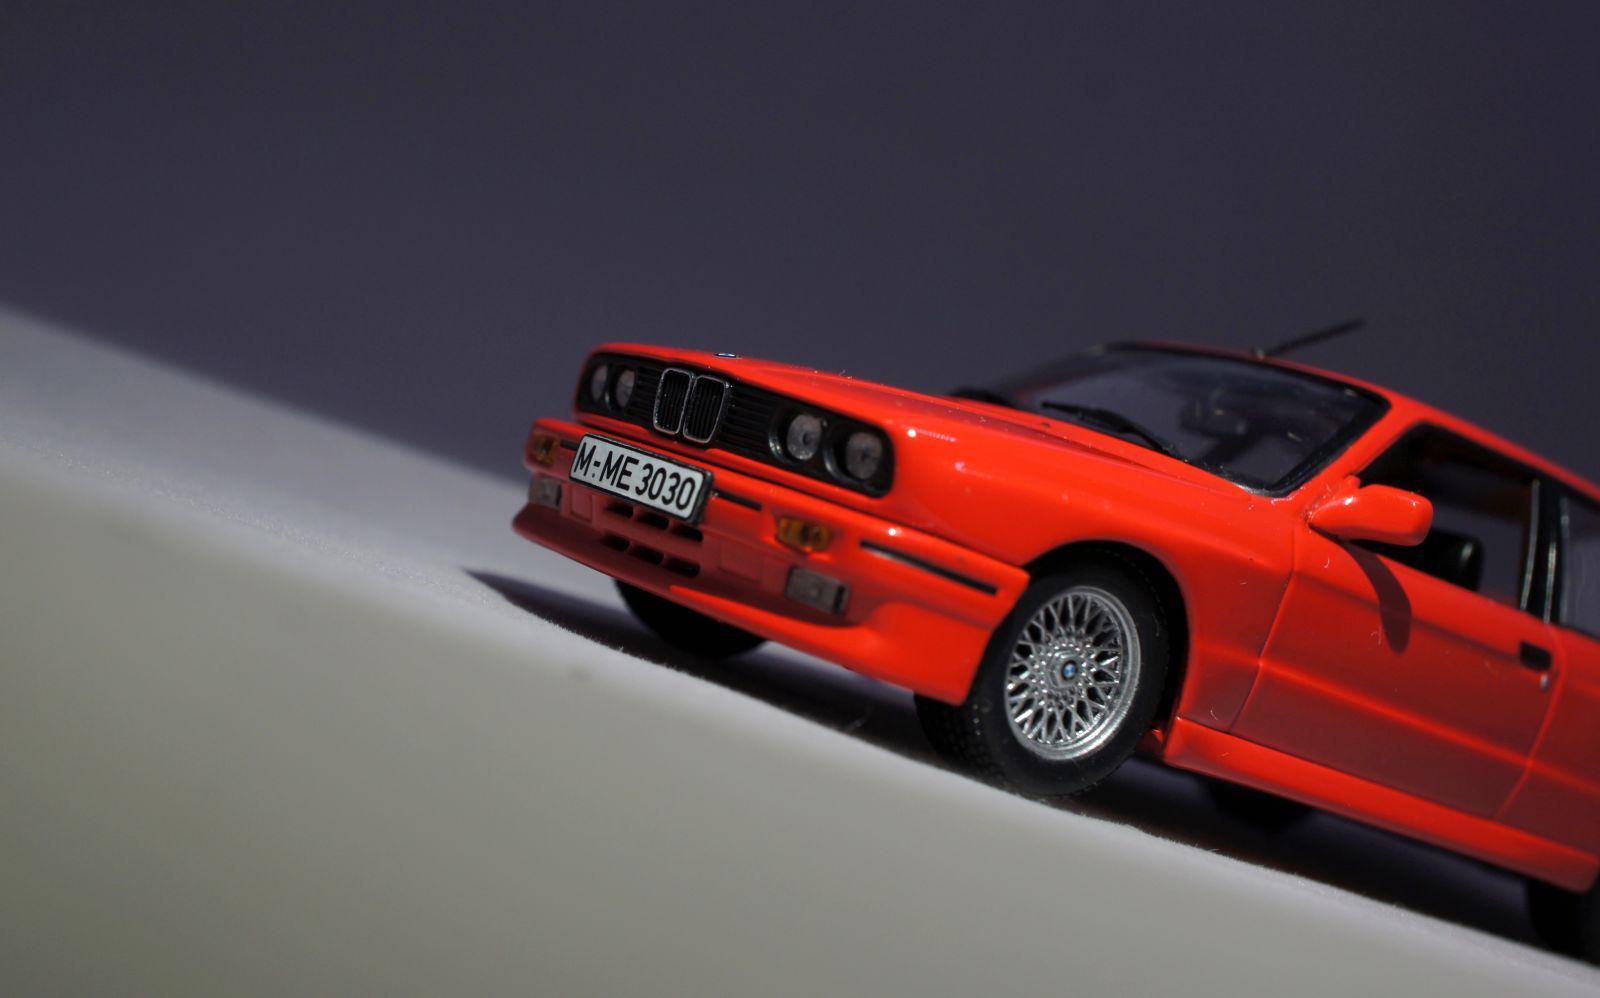 Illustration for article titled Teutonic Tuesday: Was ist denn das, noch einer E30 M3?